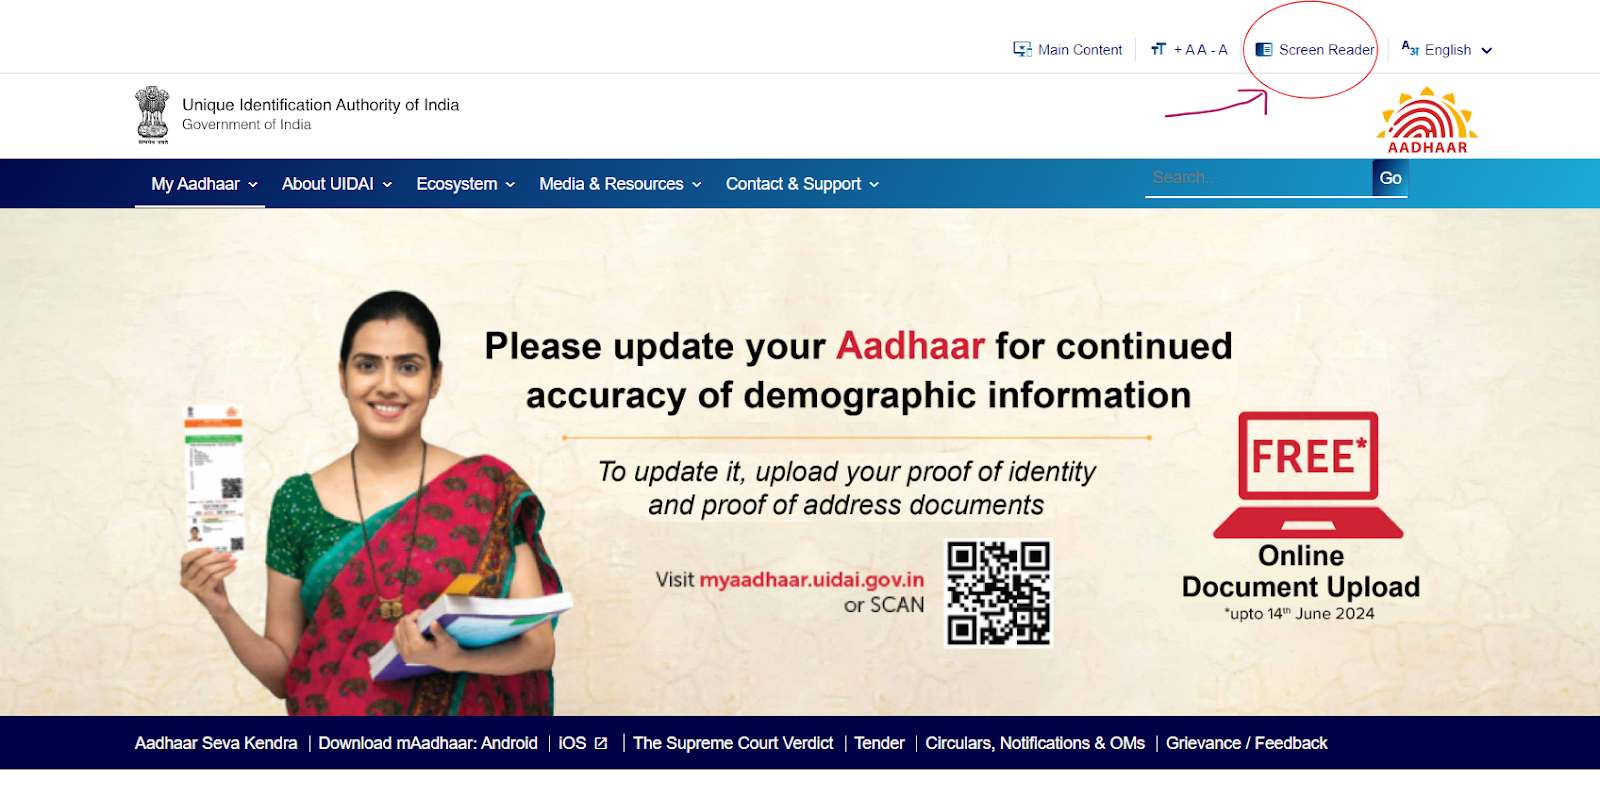 The redesigned website of Aadhar with built-in accessibility features.